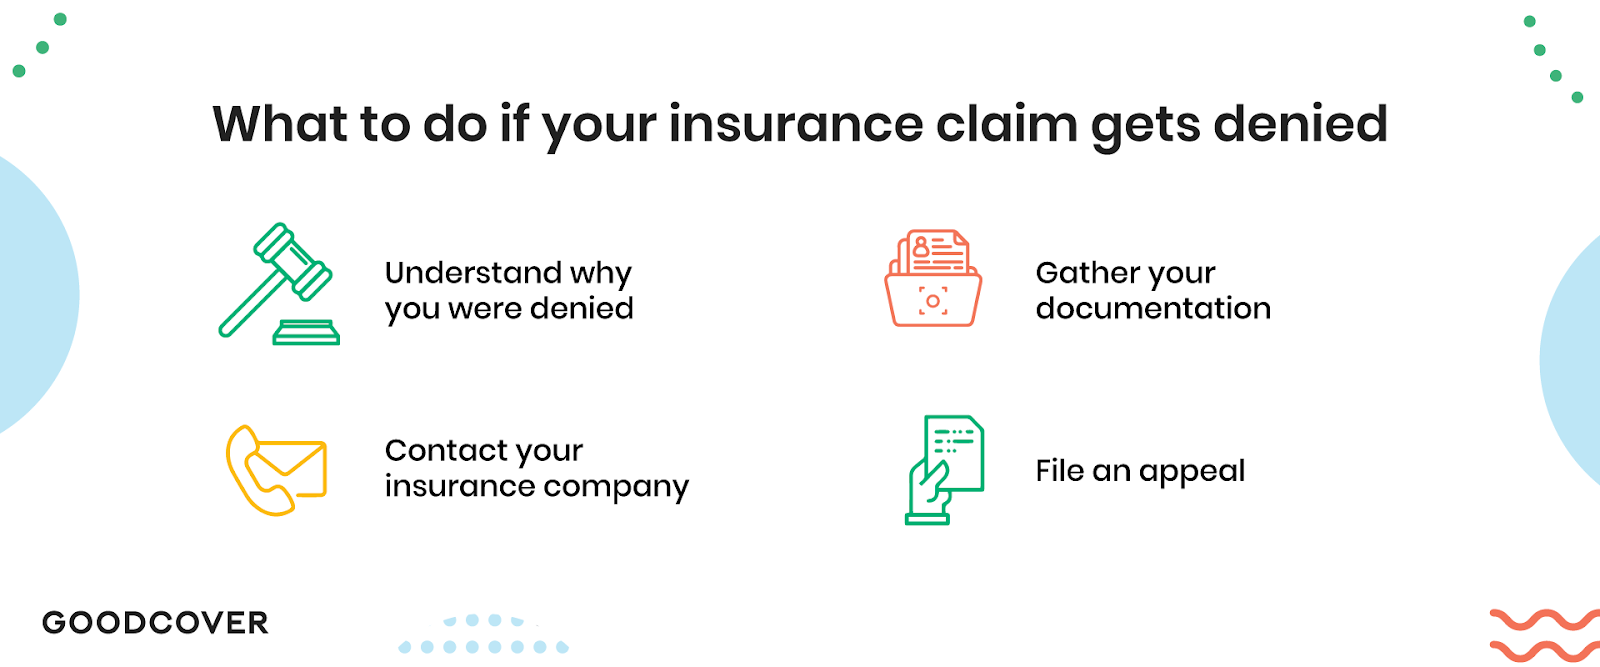 How to resolve your claim getting denied.